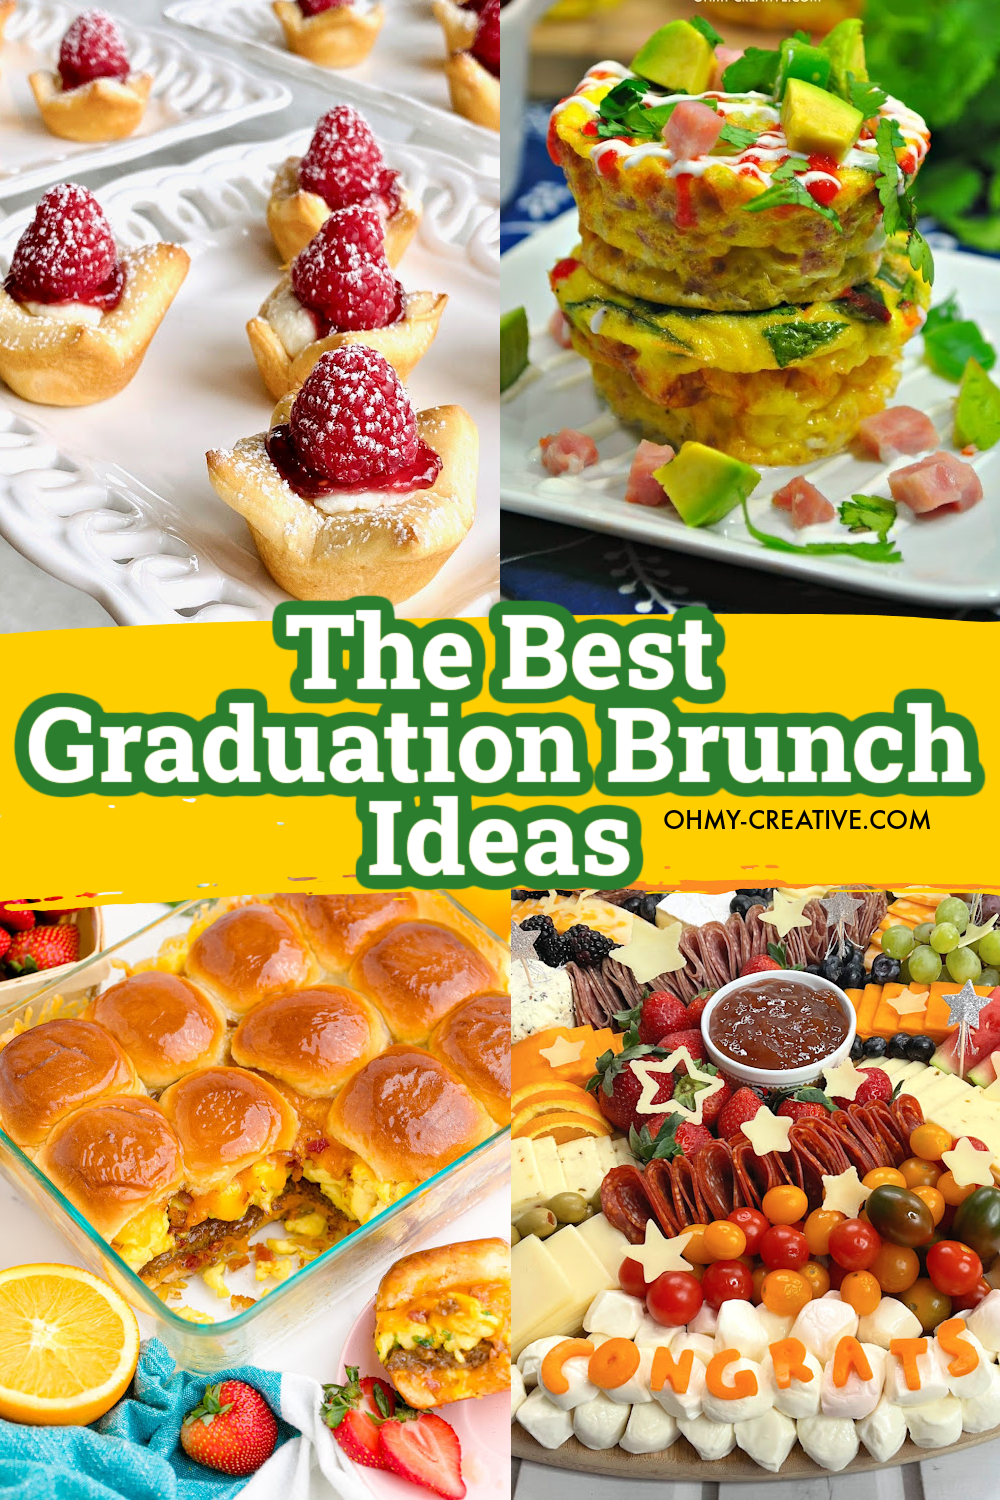 A collage of graduation brunch recipes including egg muffins, sliders and a fruit graduation charcuterie board.